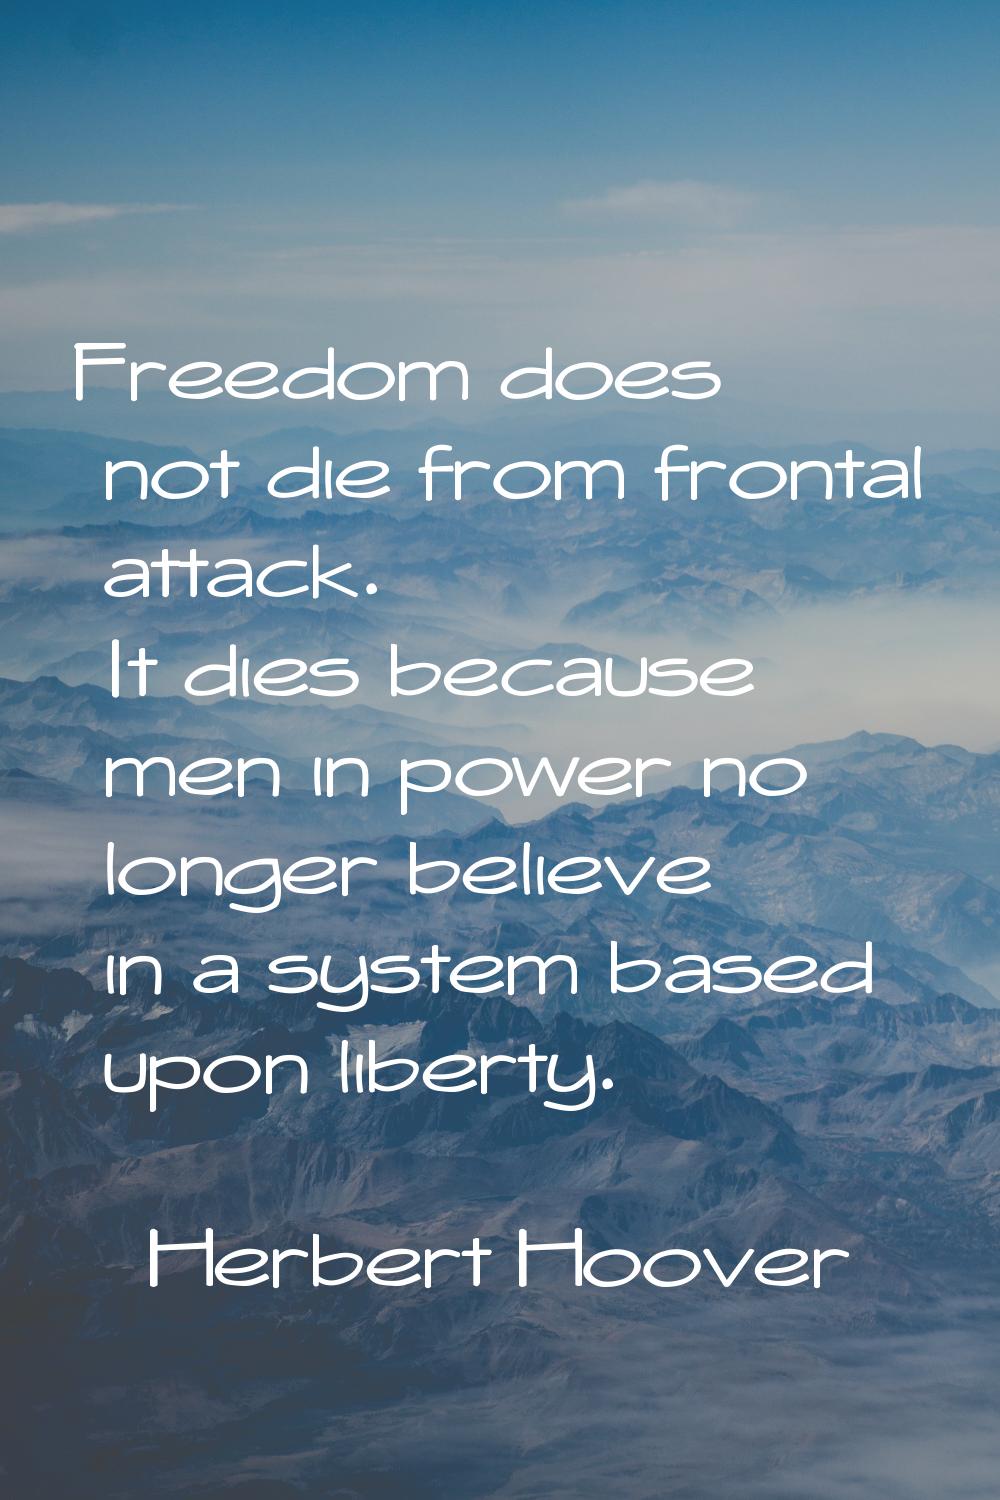 Freedom does not die from frontal attack. It dies because men in power no longer believe in a syste